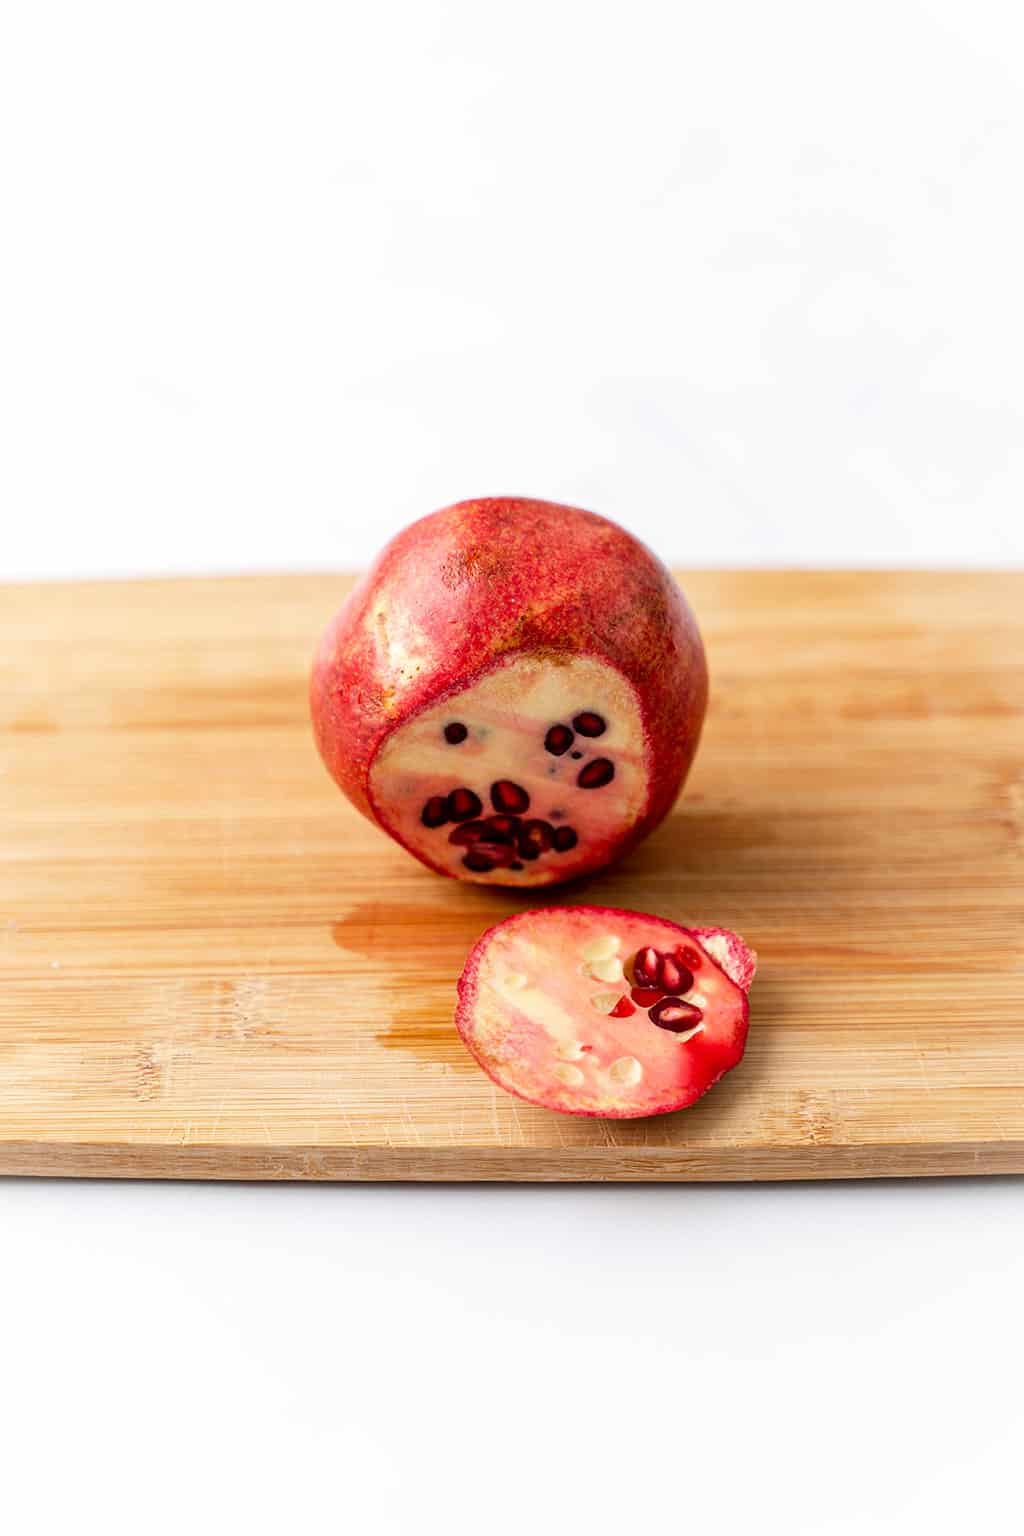 one pomegranate with skin showing 